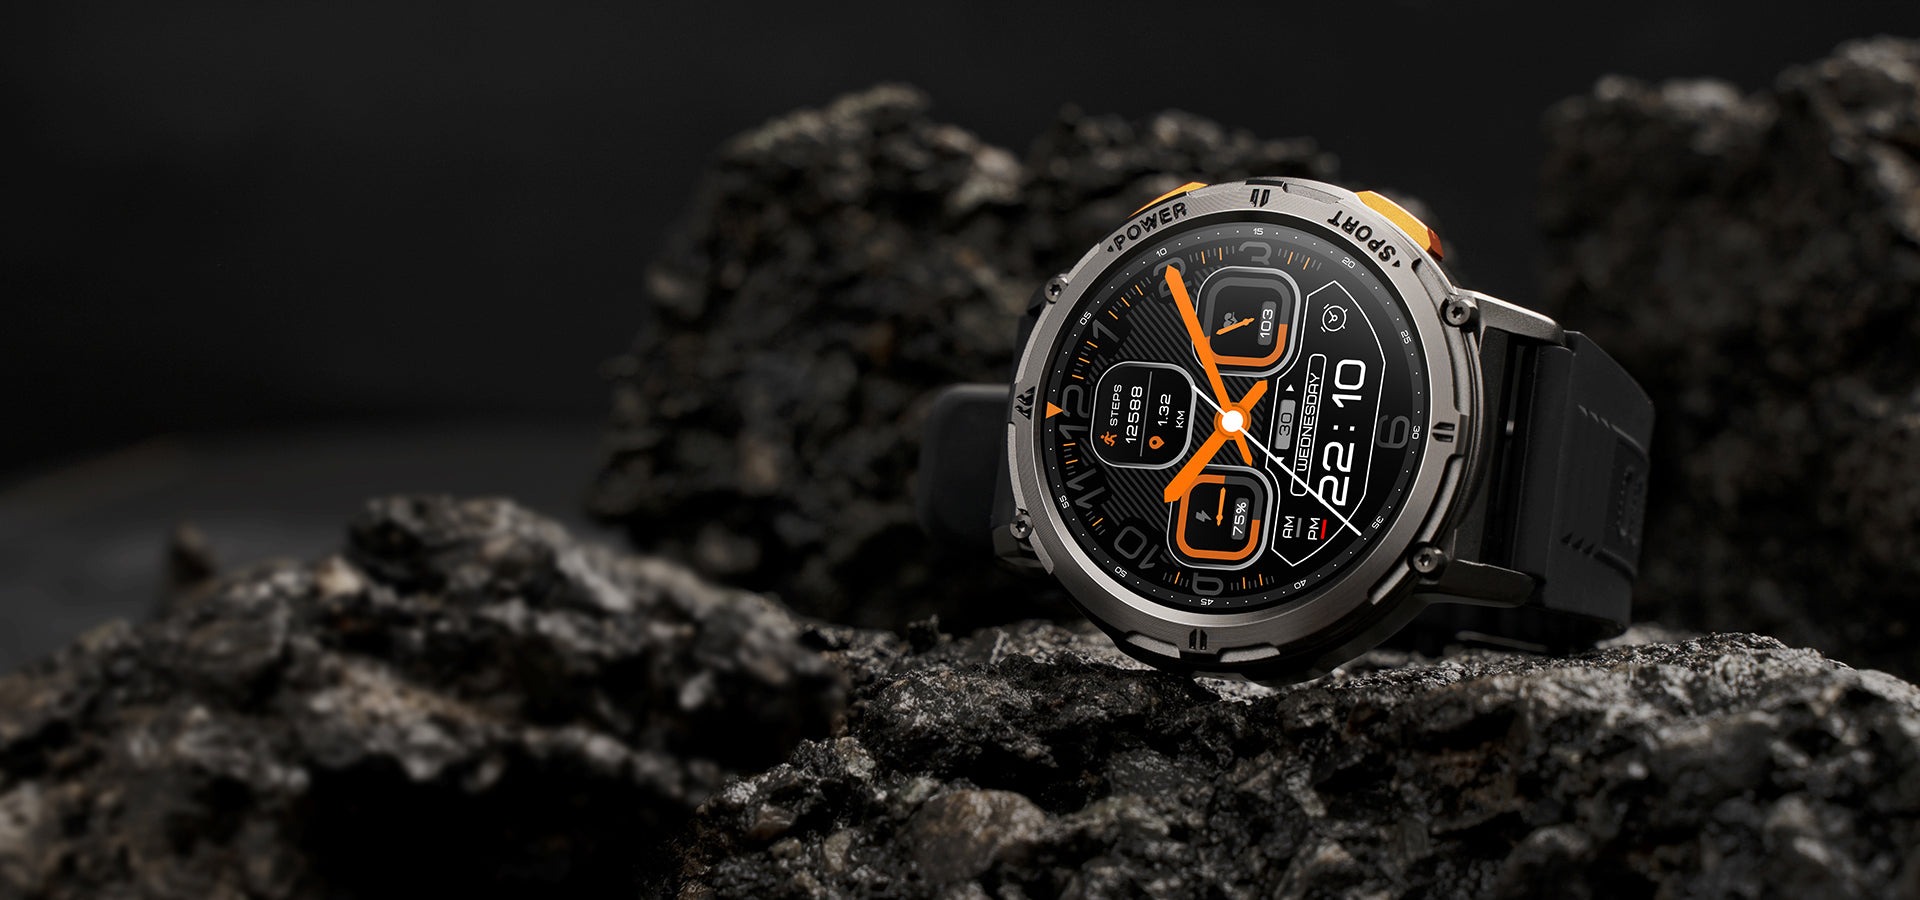 Kospect Tank T2 Smart Watch Special Edition (Metal Strap): Feature: The Kospet Tank T2 is a rugged smartwatch that stands out for its impressive array of features and military-grade build quality. With a large AMOLED retina display, it offers a clear and bright view, ensuring easy readability even under bright sunlight. What sets the Tank T2 apart is its robust construction, designed to withstand challenging conditions. Built with military-grade materials, it’s durable and long-lasting, making it an excellent choice for outdoor enthusiasts and adventurers. One of its standout features is its remarkable water resistance, rated at 5ATM and IP69K. This means it can handle being submerged in water, making it ideal for swimming and other aquatic activities. For fitness enthusiasts, the Tank T2 boasts an impressive selection of 70 sports modes, allowing you to accurately track your progress and performance. Additionally, it features a 24/7 health monitor, keeping tabs on crucial health metrics such as heart rate, blood oxygen levels, and sleep patterns. These insights provide valuable information about your overall well-being. Communication is made easy with Bluetooth calling and HIFI audio support, ensuring clear and seamless conversations. Despite its advanced features, the smartwatch boasts a mega battery life, capable of lasting all day, even with heavy usage. Another convenient feature is the always-on display, allowing you to check the time without having to activate the watch. This feature enhances usability, especially during workouts or when you’re on the move. In summary, the Kospet Tank T2 is a top-tier rugged smartwatch suitable for those seeking advanced functionality and military-grade durability. Its combination of a high-quality display, durability, water resistance, fitness tracking capabilities, and long battery life makes it a compelling choice for outdoor enthusiasts and anyone with an active lifestyle. Specifications: Bluetooth 5.0 Bluetooth Calling 64 KB RAM, 128 MB Inbuilt 1.43 in Touch Display Water Resistant, 5 ATM, IP69K Heart Rate Monitor SpO2 (Blood Oxygen) Monitor, Blood Pressure Monitor